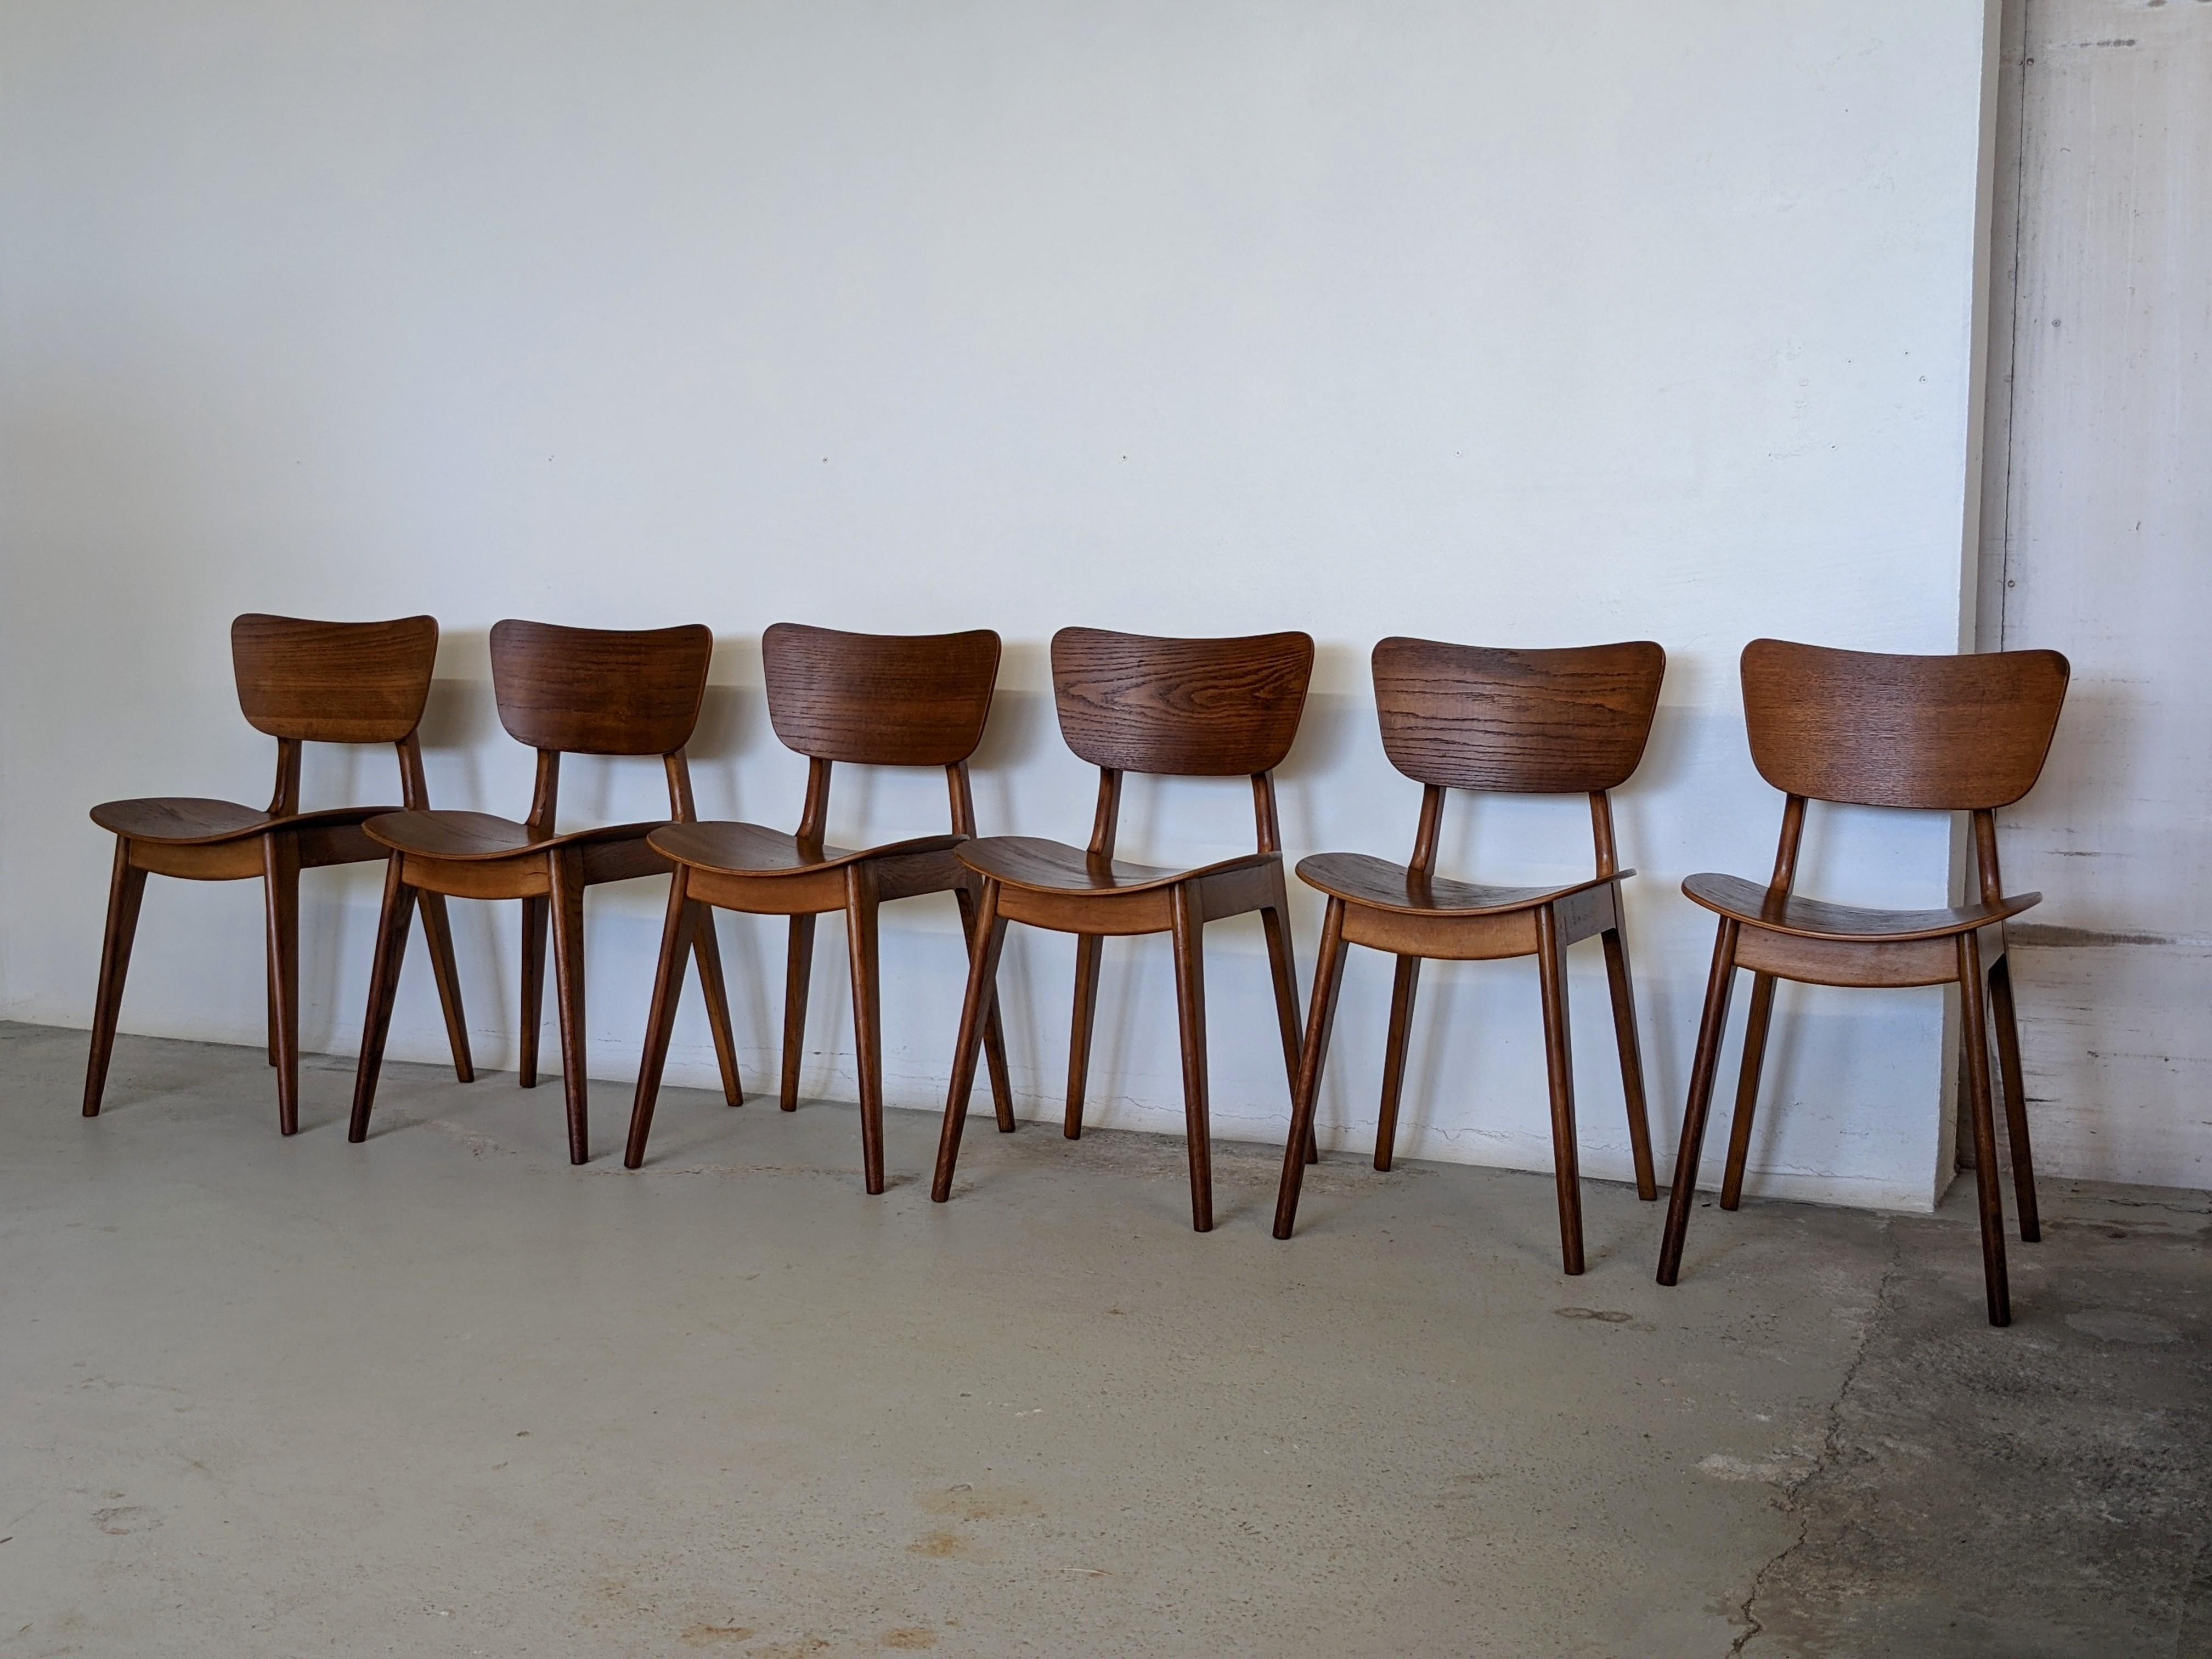 Set of 6 dining chairs by french designer Roger Landault.
Made in France in the 1950s.
Solid oak wood structure, moulded plywood seat and back rest with oak wood veneer
Beautiful grain.